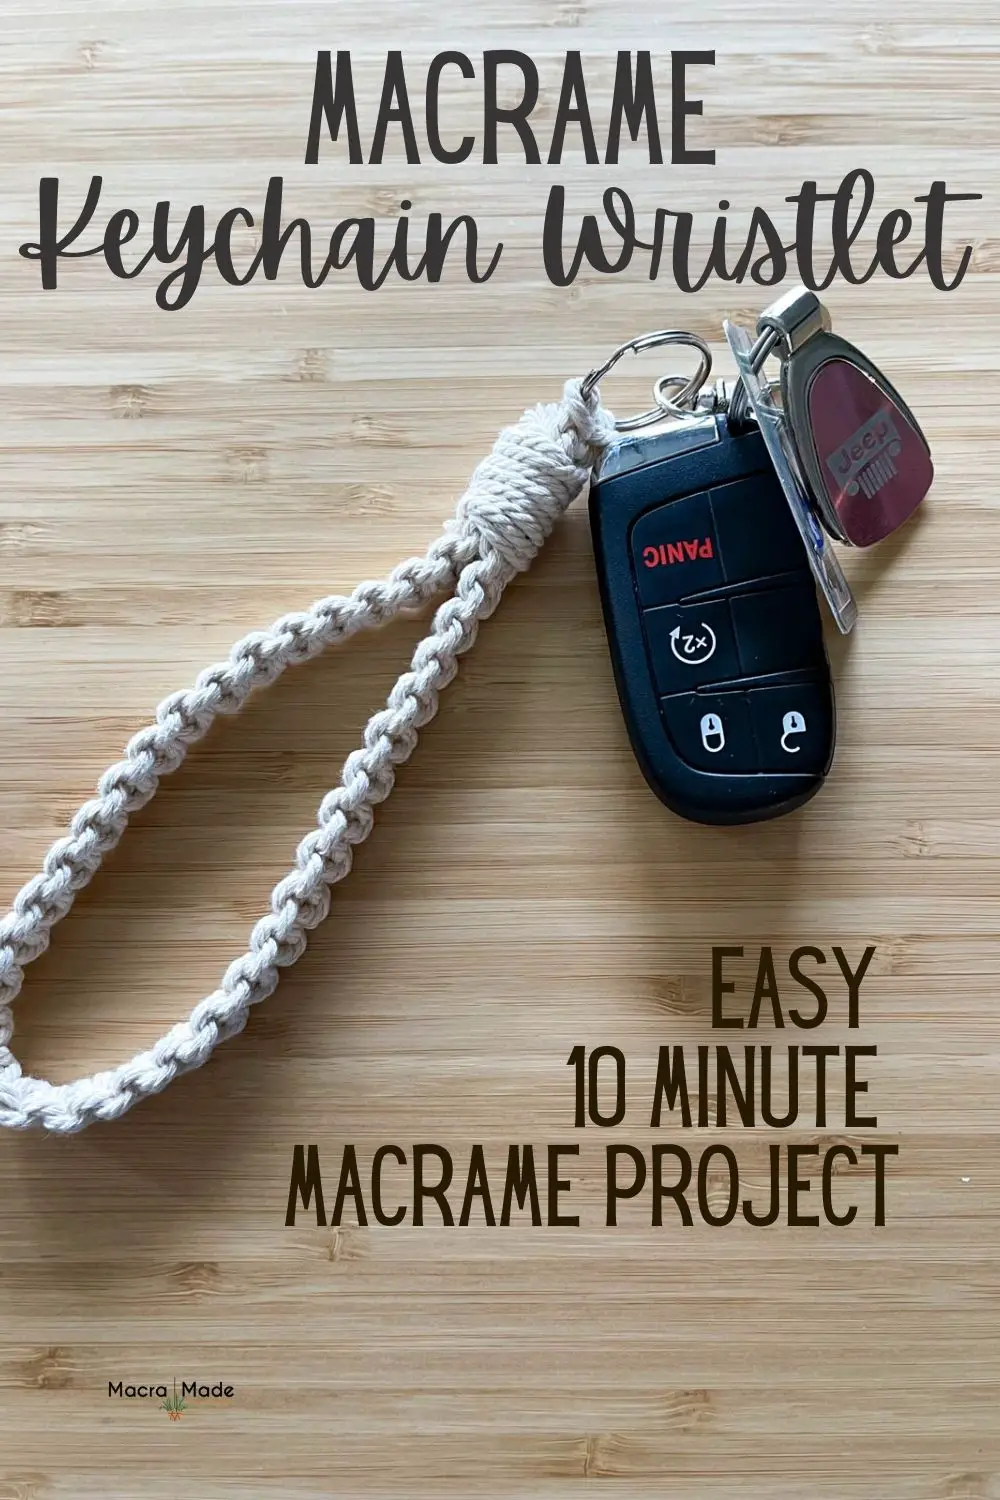 image of macrame keychain wristlet with text overlay